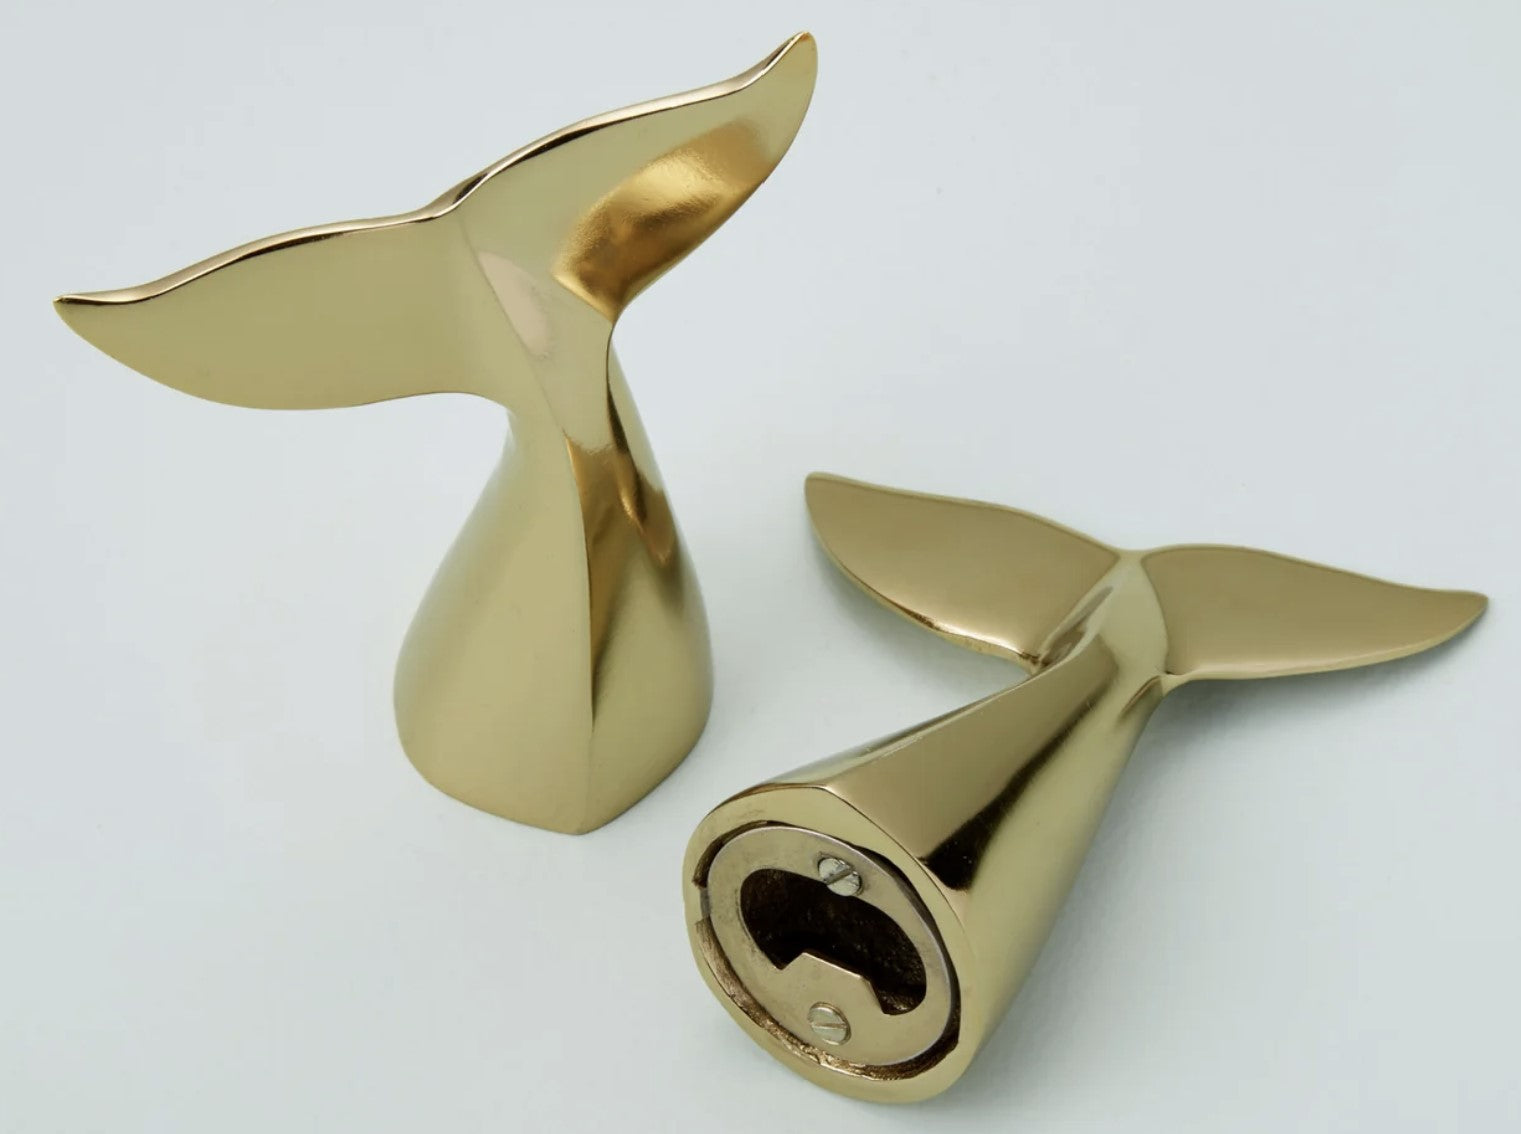 Gold Whale's Tail Bottle Opener